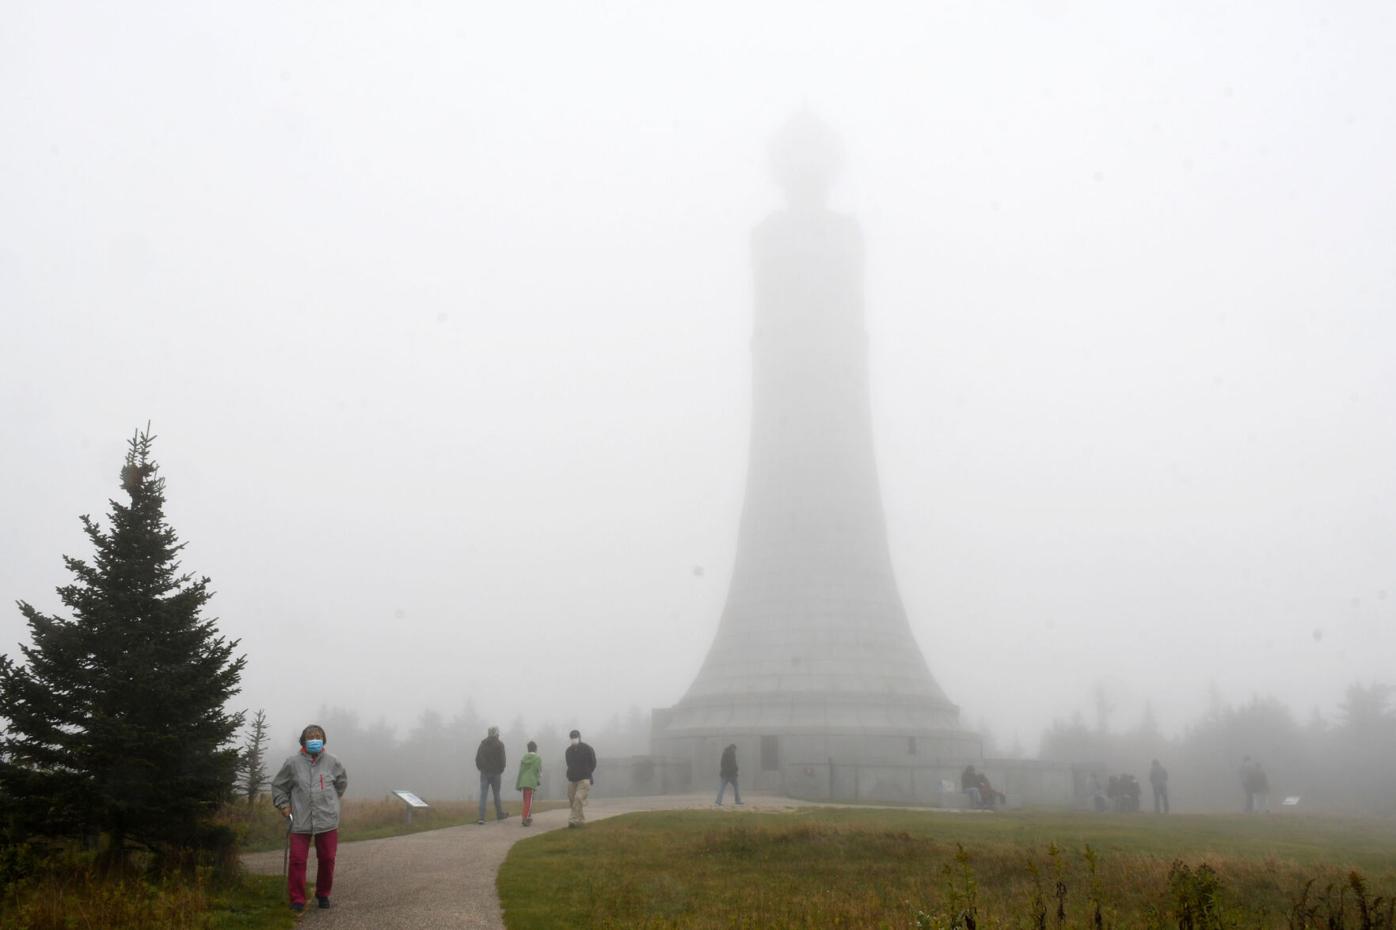 The summit of Mount Greylock is shrouded in fog